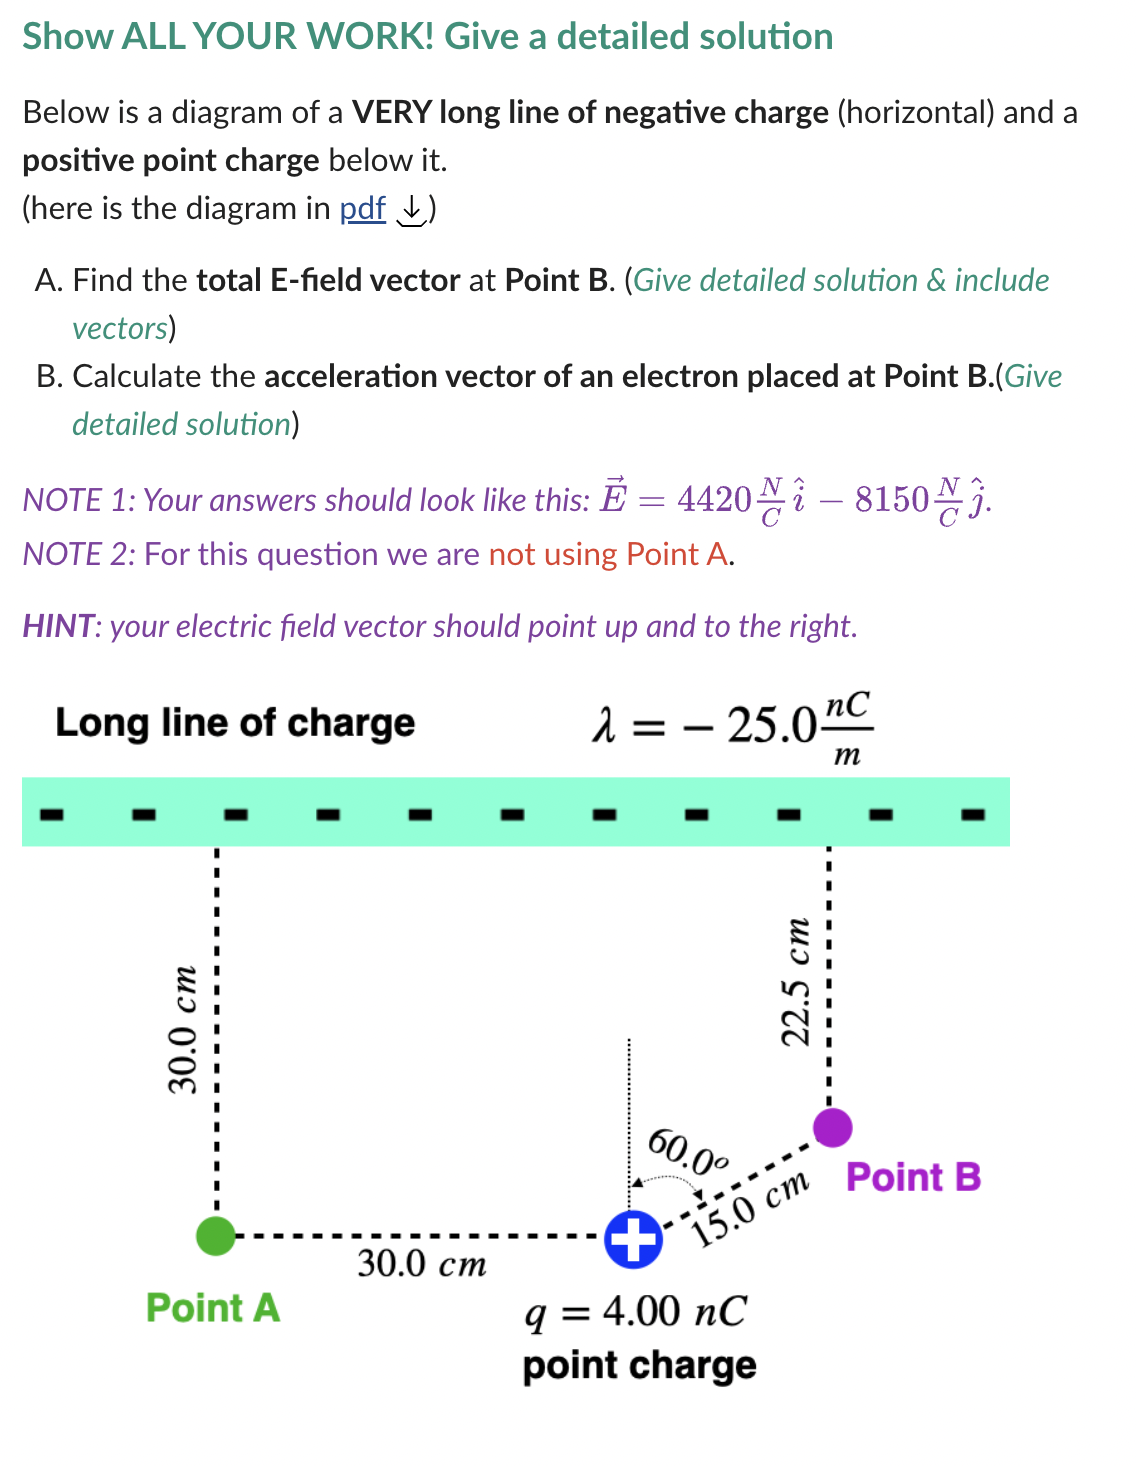 Show ALL YOUR WORK! Give a detailed solution
Below is a diagram of a VERY long line of negative charge (horizontal) and a
positive point charge below it.
(here is the diagram in pdf)
A. Find the total E-field vector at Point B. (Give detailed solution & include
vectors)
B. Calculate the acceleration vector of an electron placed at Point B.(Give
detailed solution)
NOTE 1: Your answers should look like this: E = 4420
NOTE 2: For this question we are not using Point A.
HINT: your electric field vector should point up and to the right.
Long line of charge
30.0 cm
Point A
4420-815003.
30.0 cm
λ = -25.0 nC
nc
m
60.0⁰
+
q = 4.00 nC
point charge
22.5 cm
15.0 cm
Point B